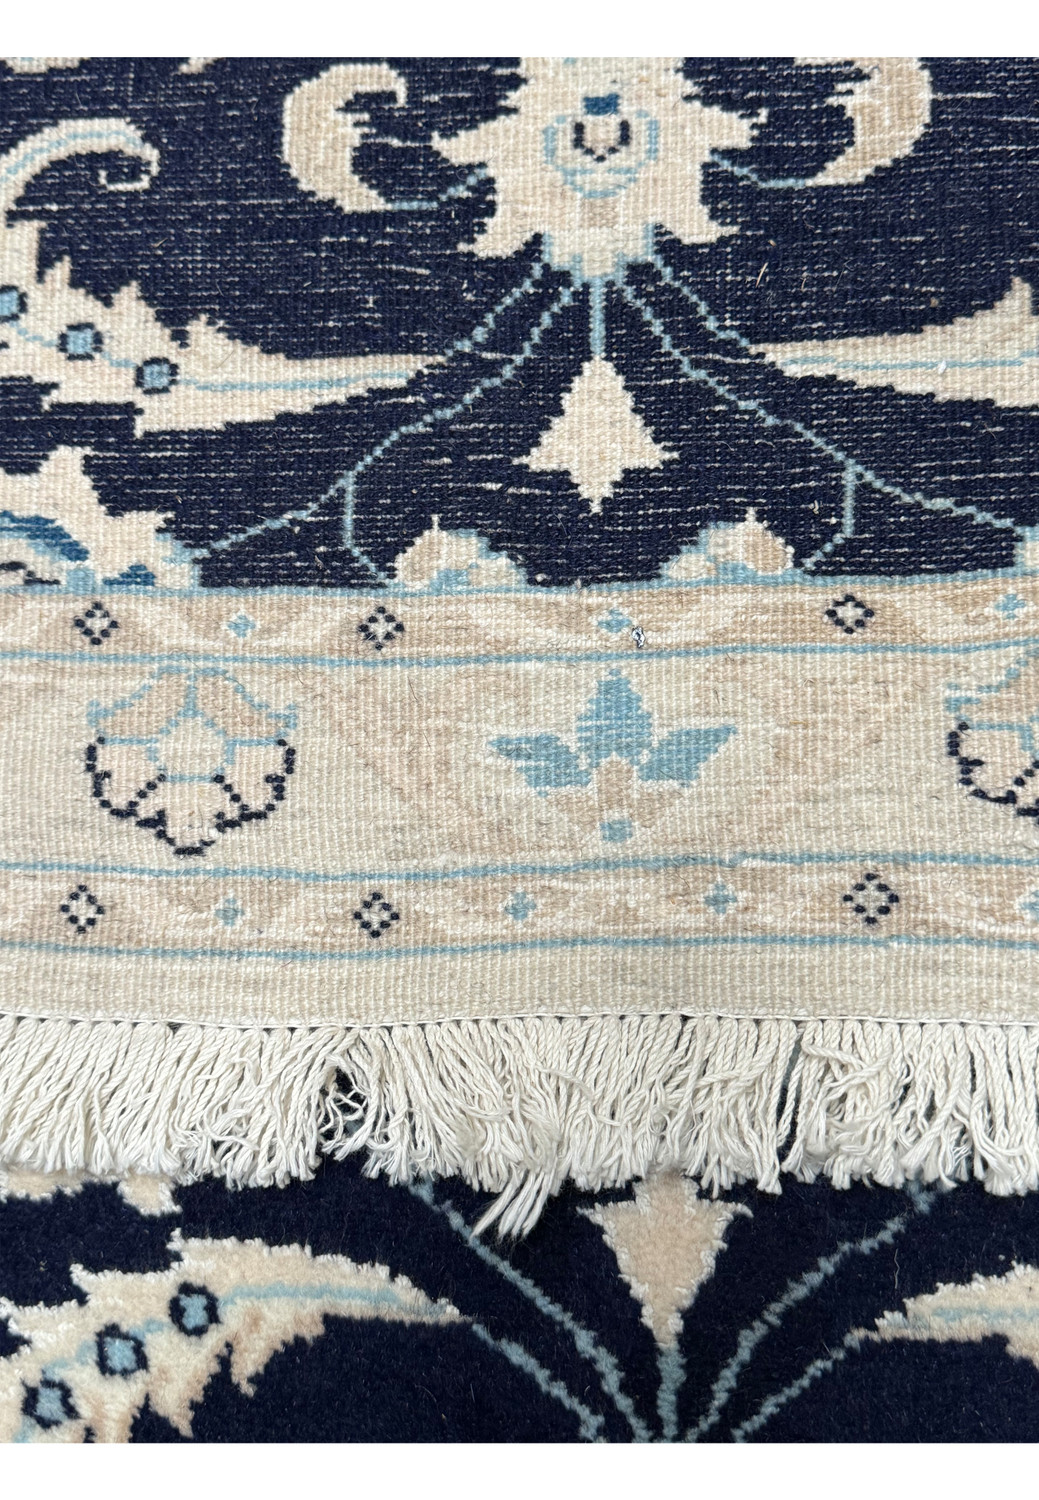 The reverse side of the Persian Nain Runner showing the woven structure and knots, indicative of its handcrafted quality and authenticity.